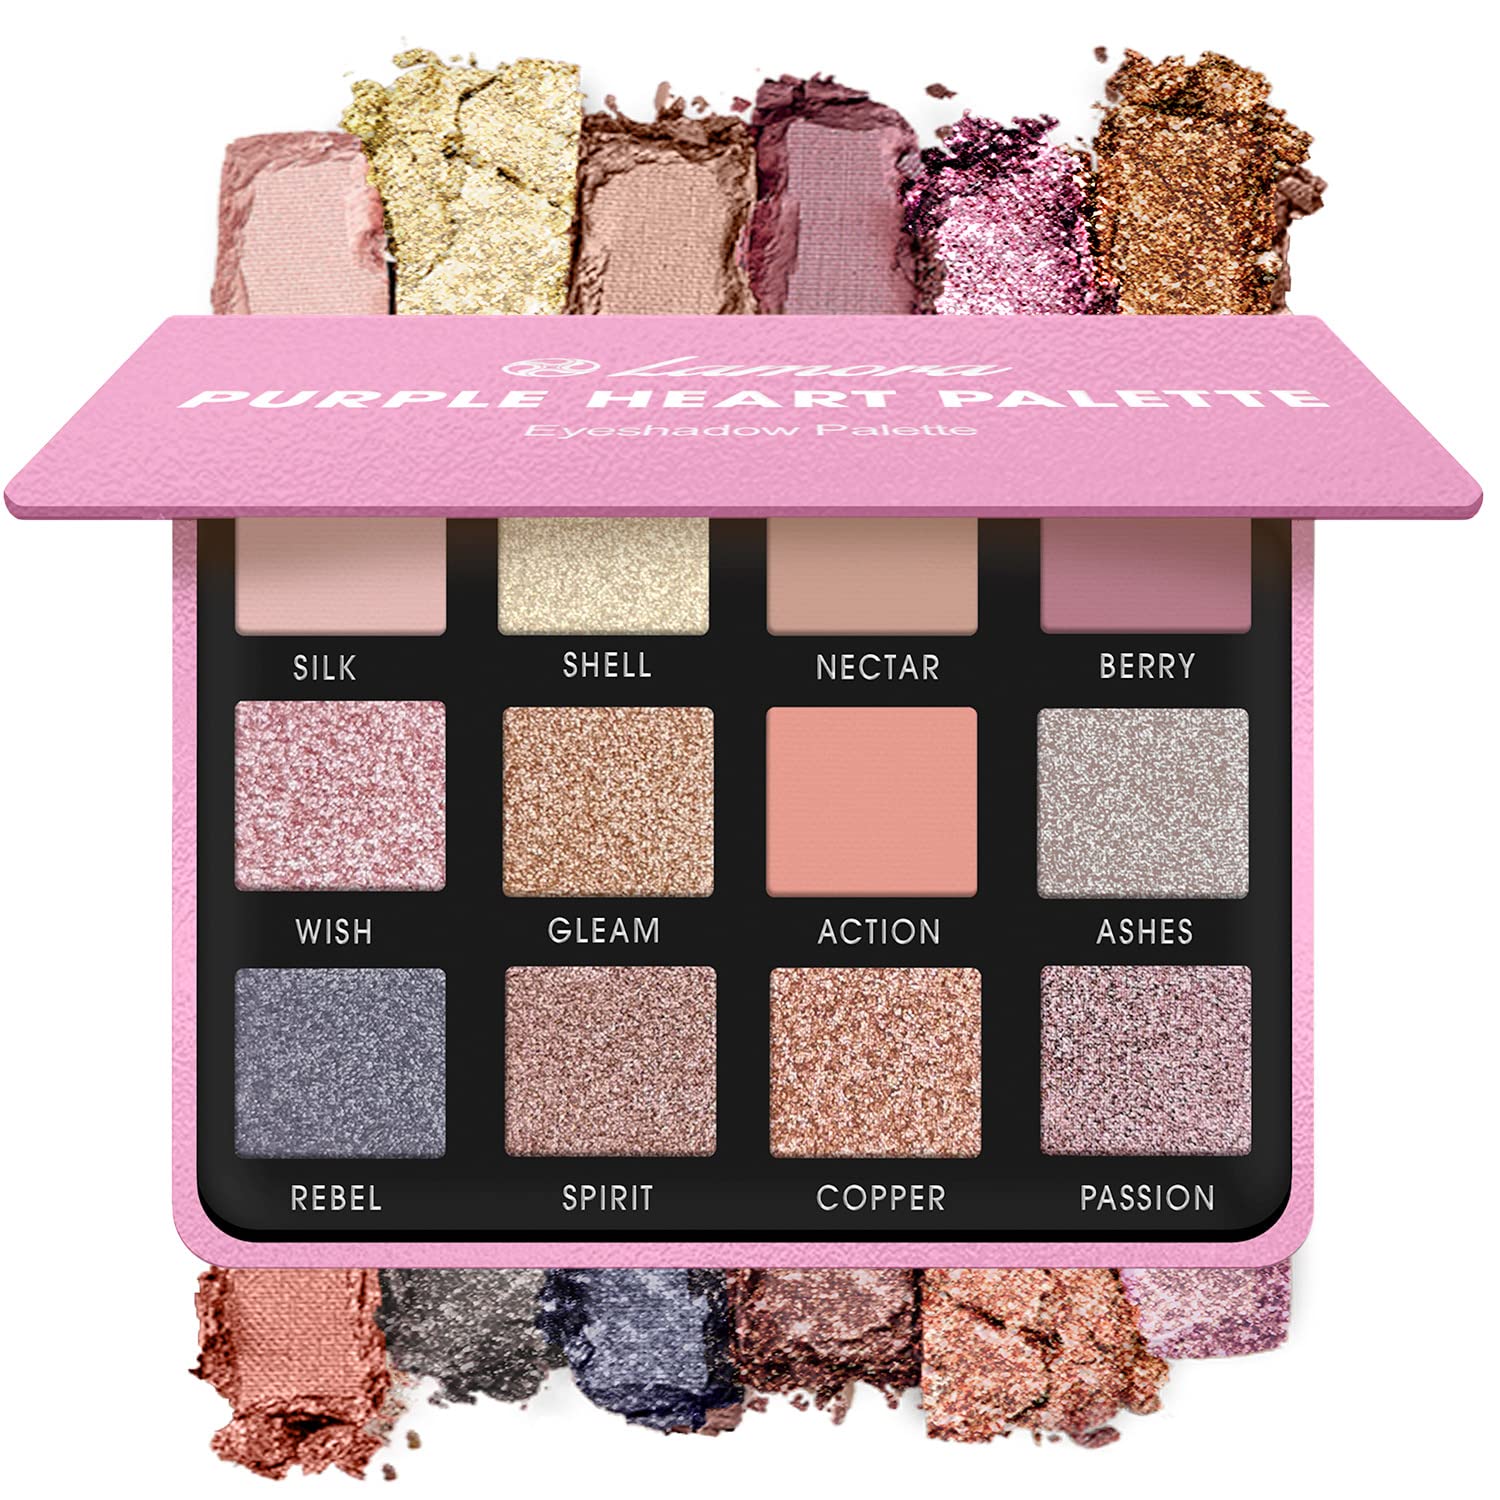 By The Rosé Eyeshadow Palette